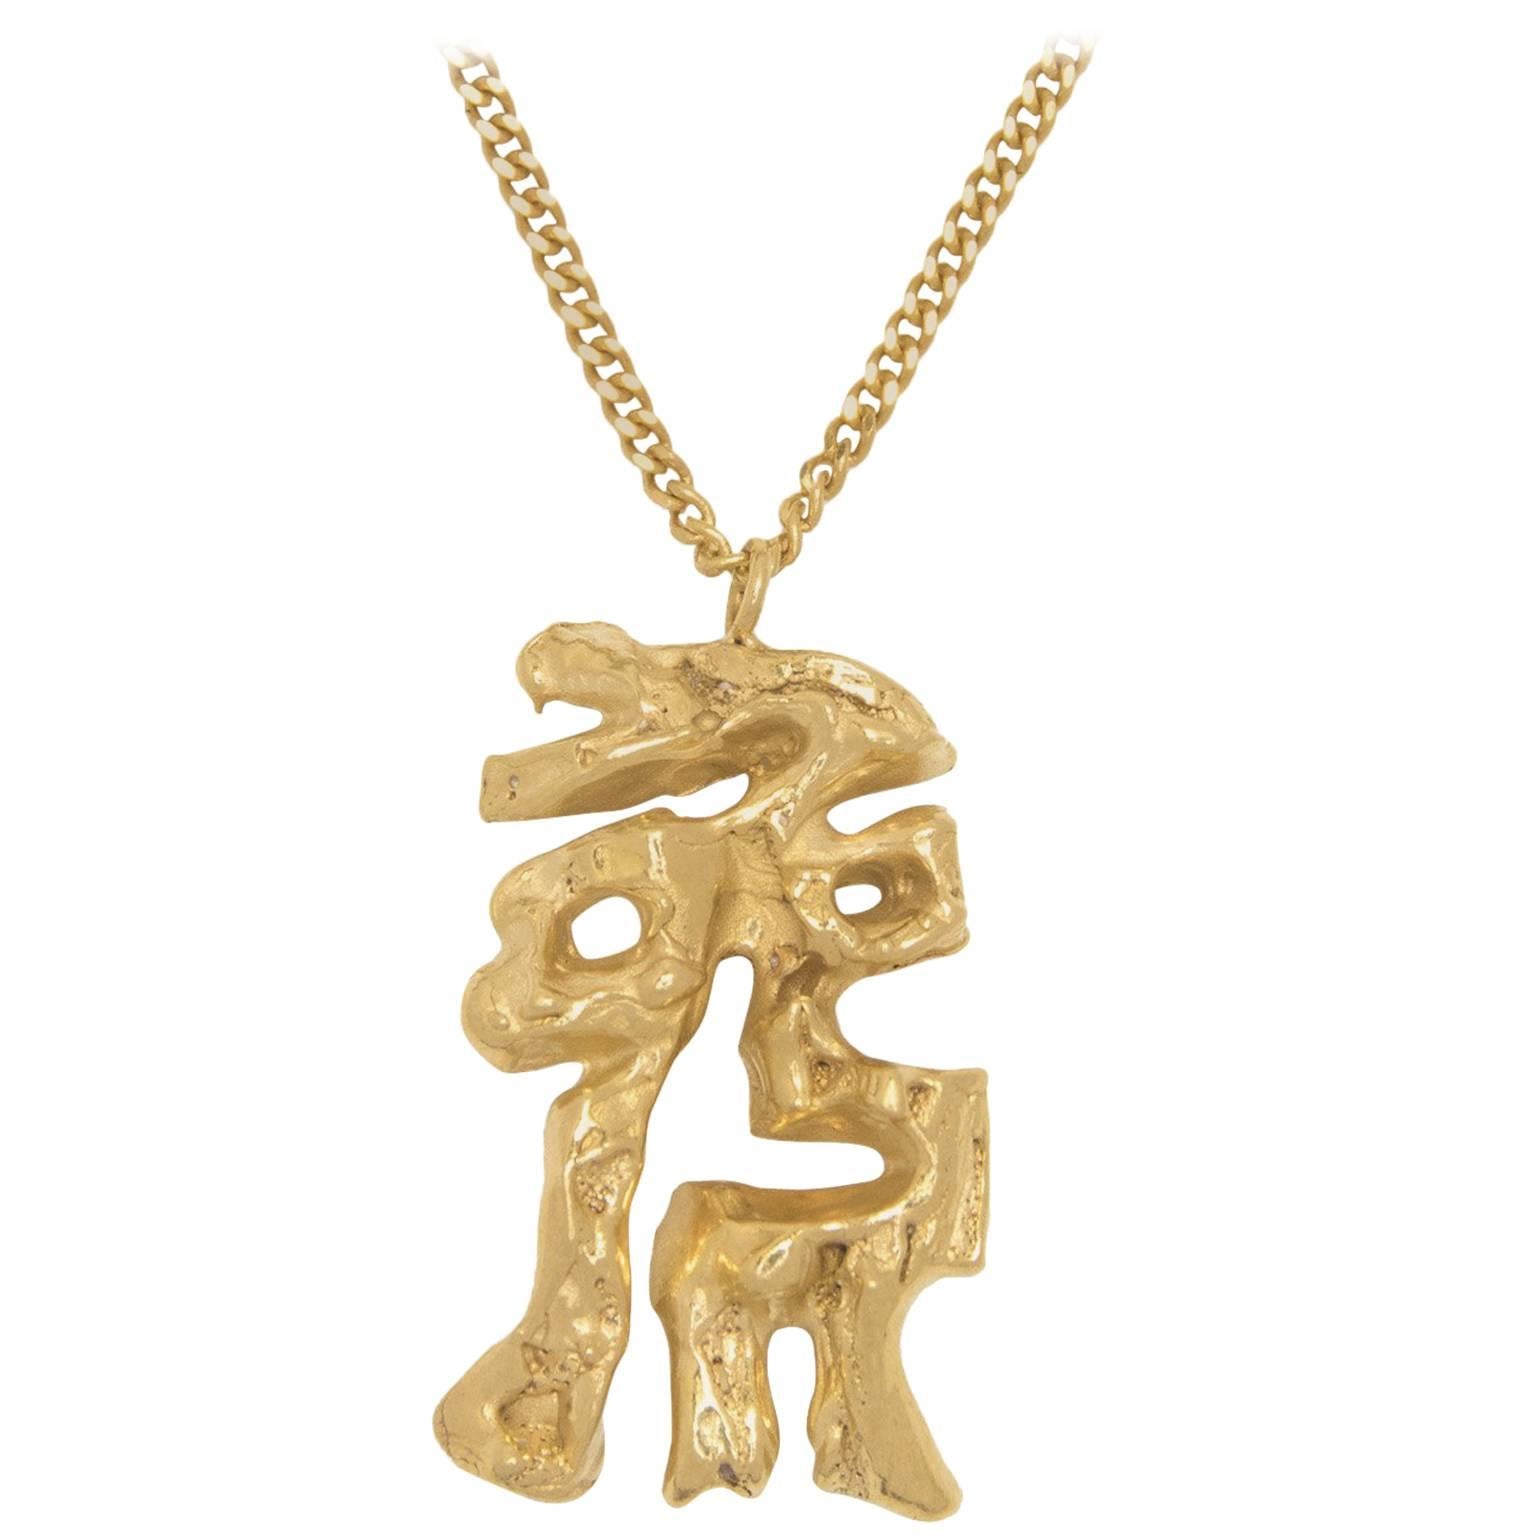 Loveness Lee Chinese Zodiac Rabbit Horoscope Gold Pendant Necklace For Sale